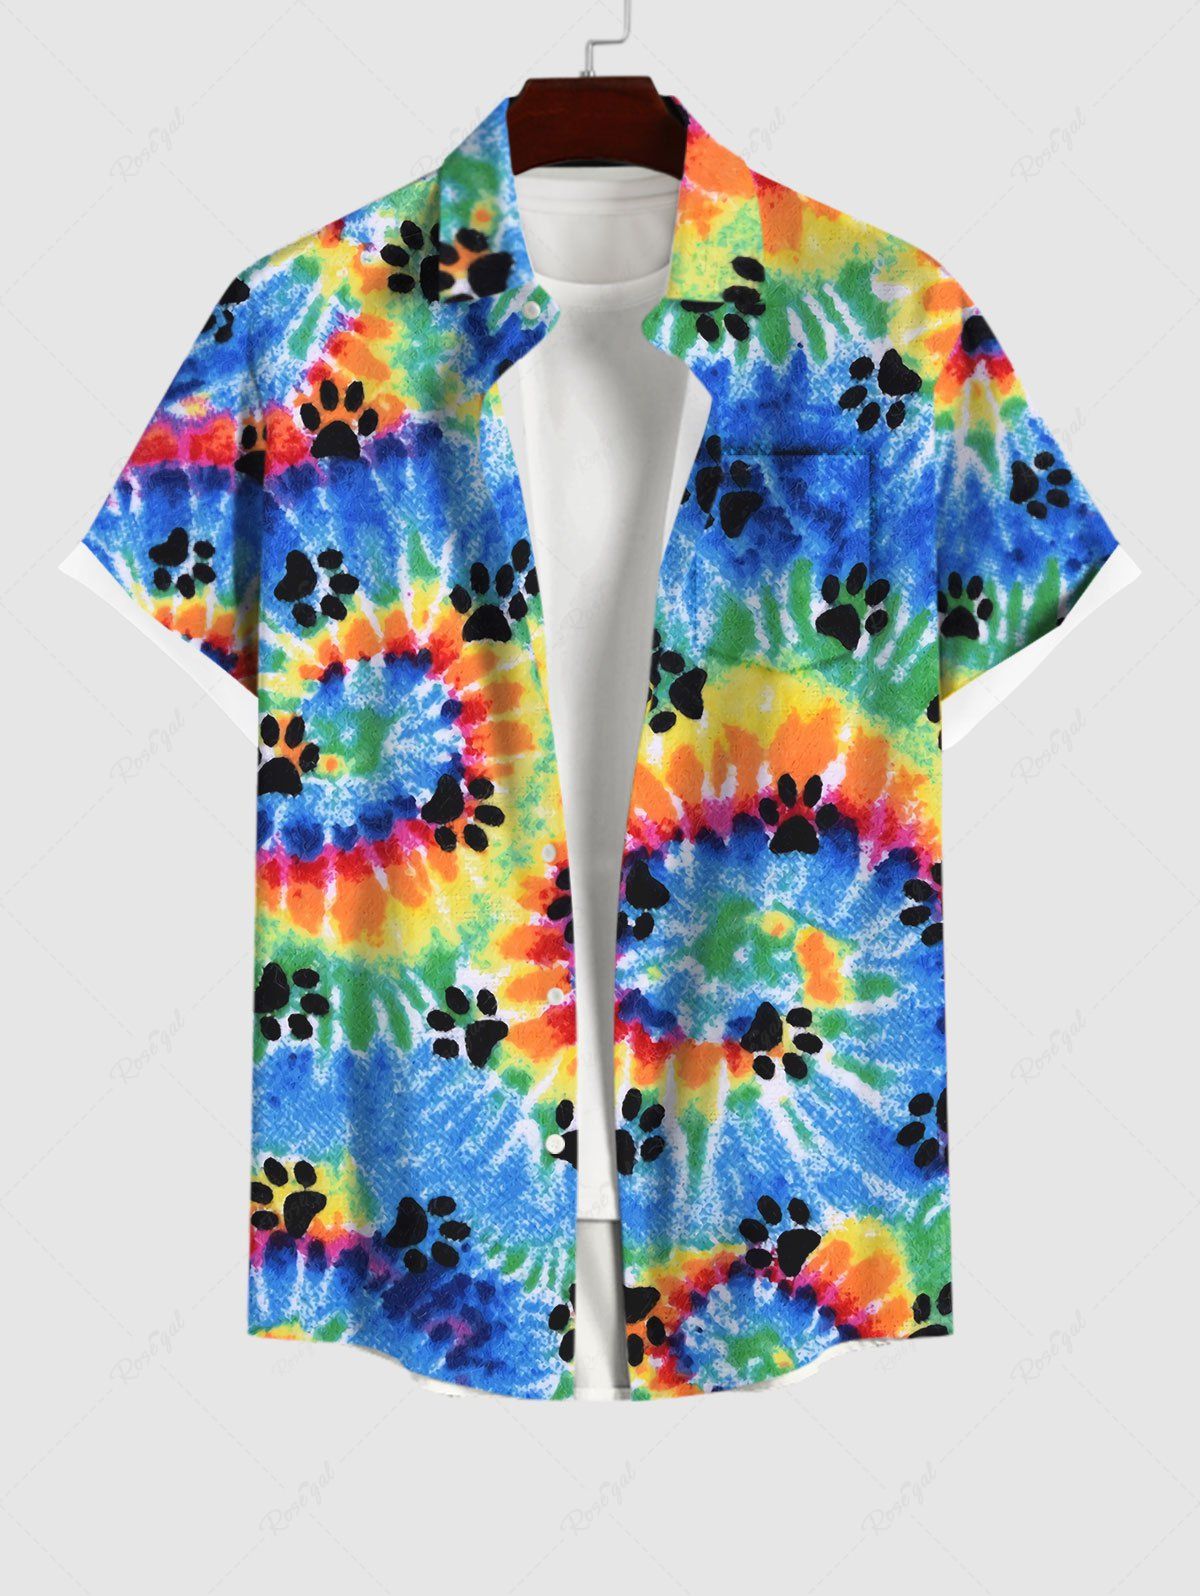 Sale Hawaii Plus Size Turn-down Collar Spiral Watercolor Tie Dye Cat Paw Print Buttons Pocket Beach Shirt For Men  